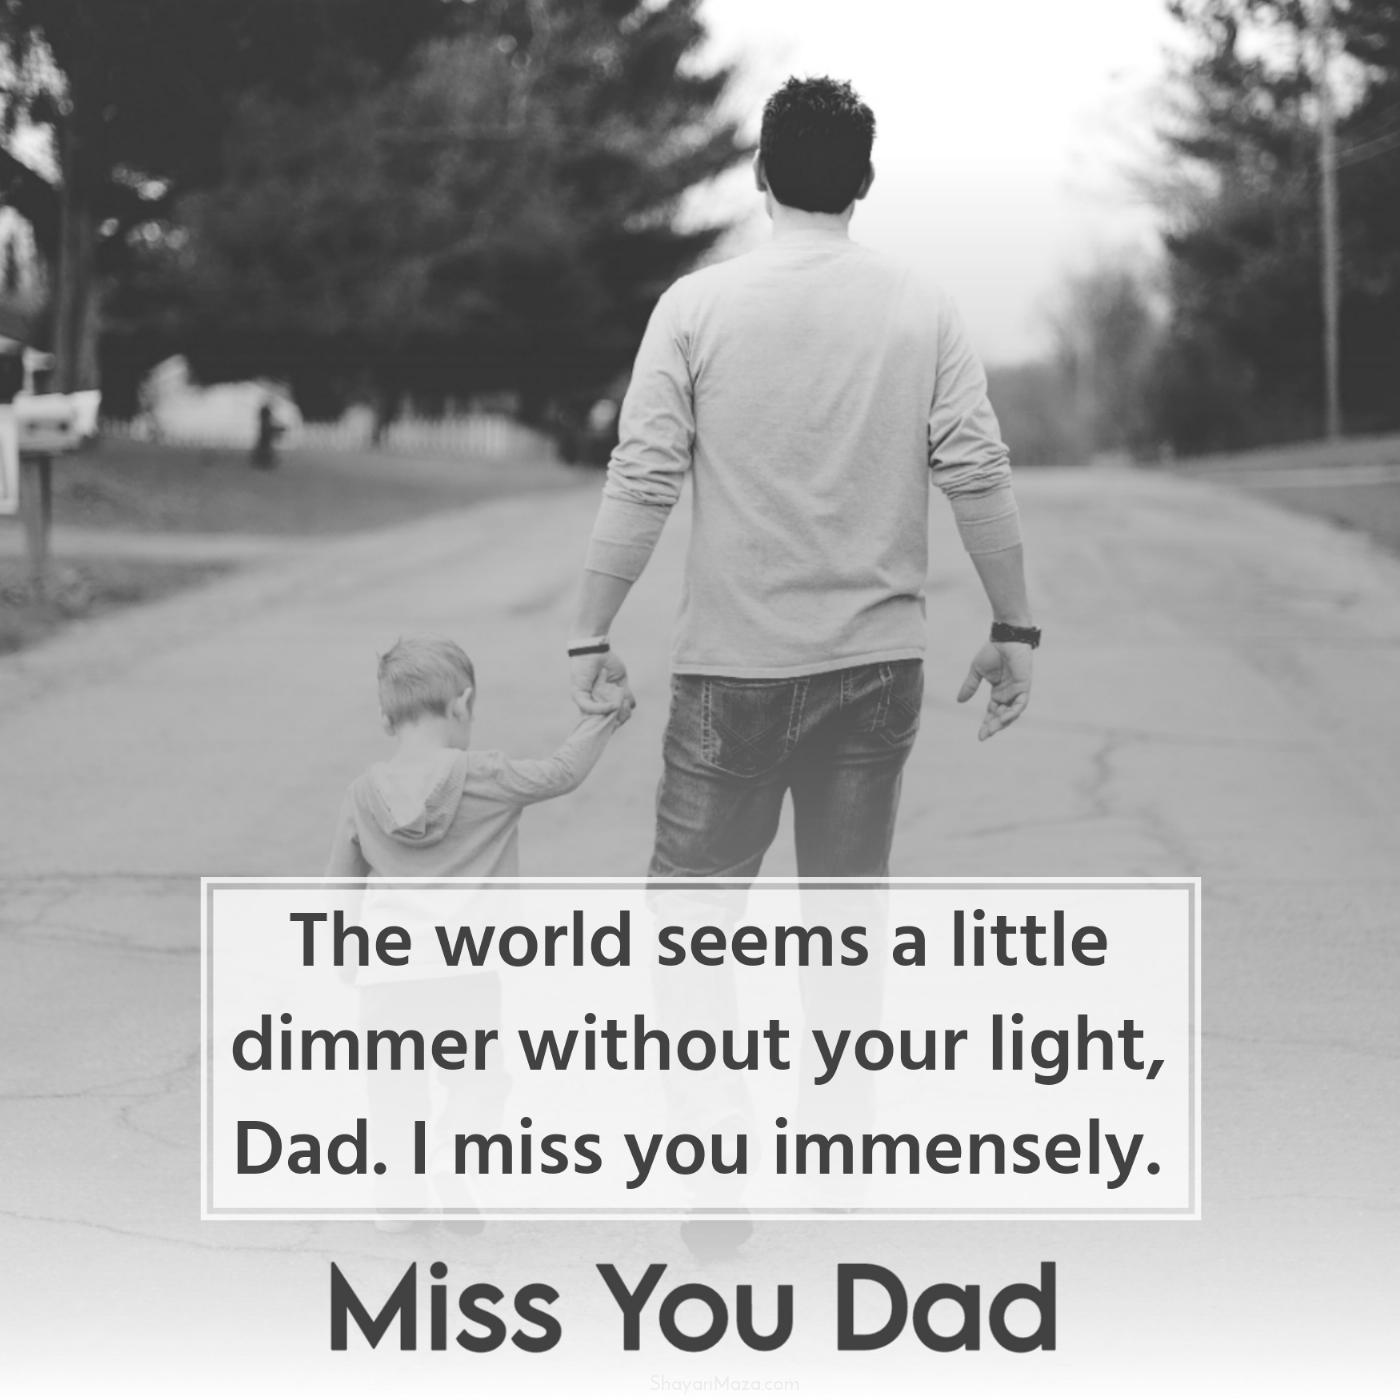 The world seems a little dimmer without your light Dad